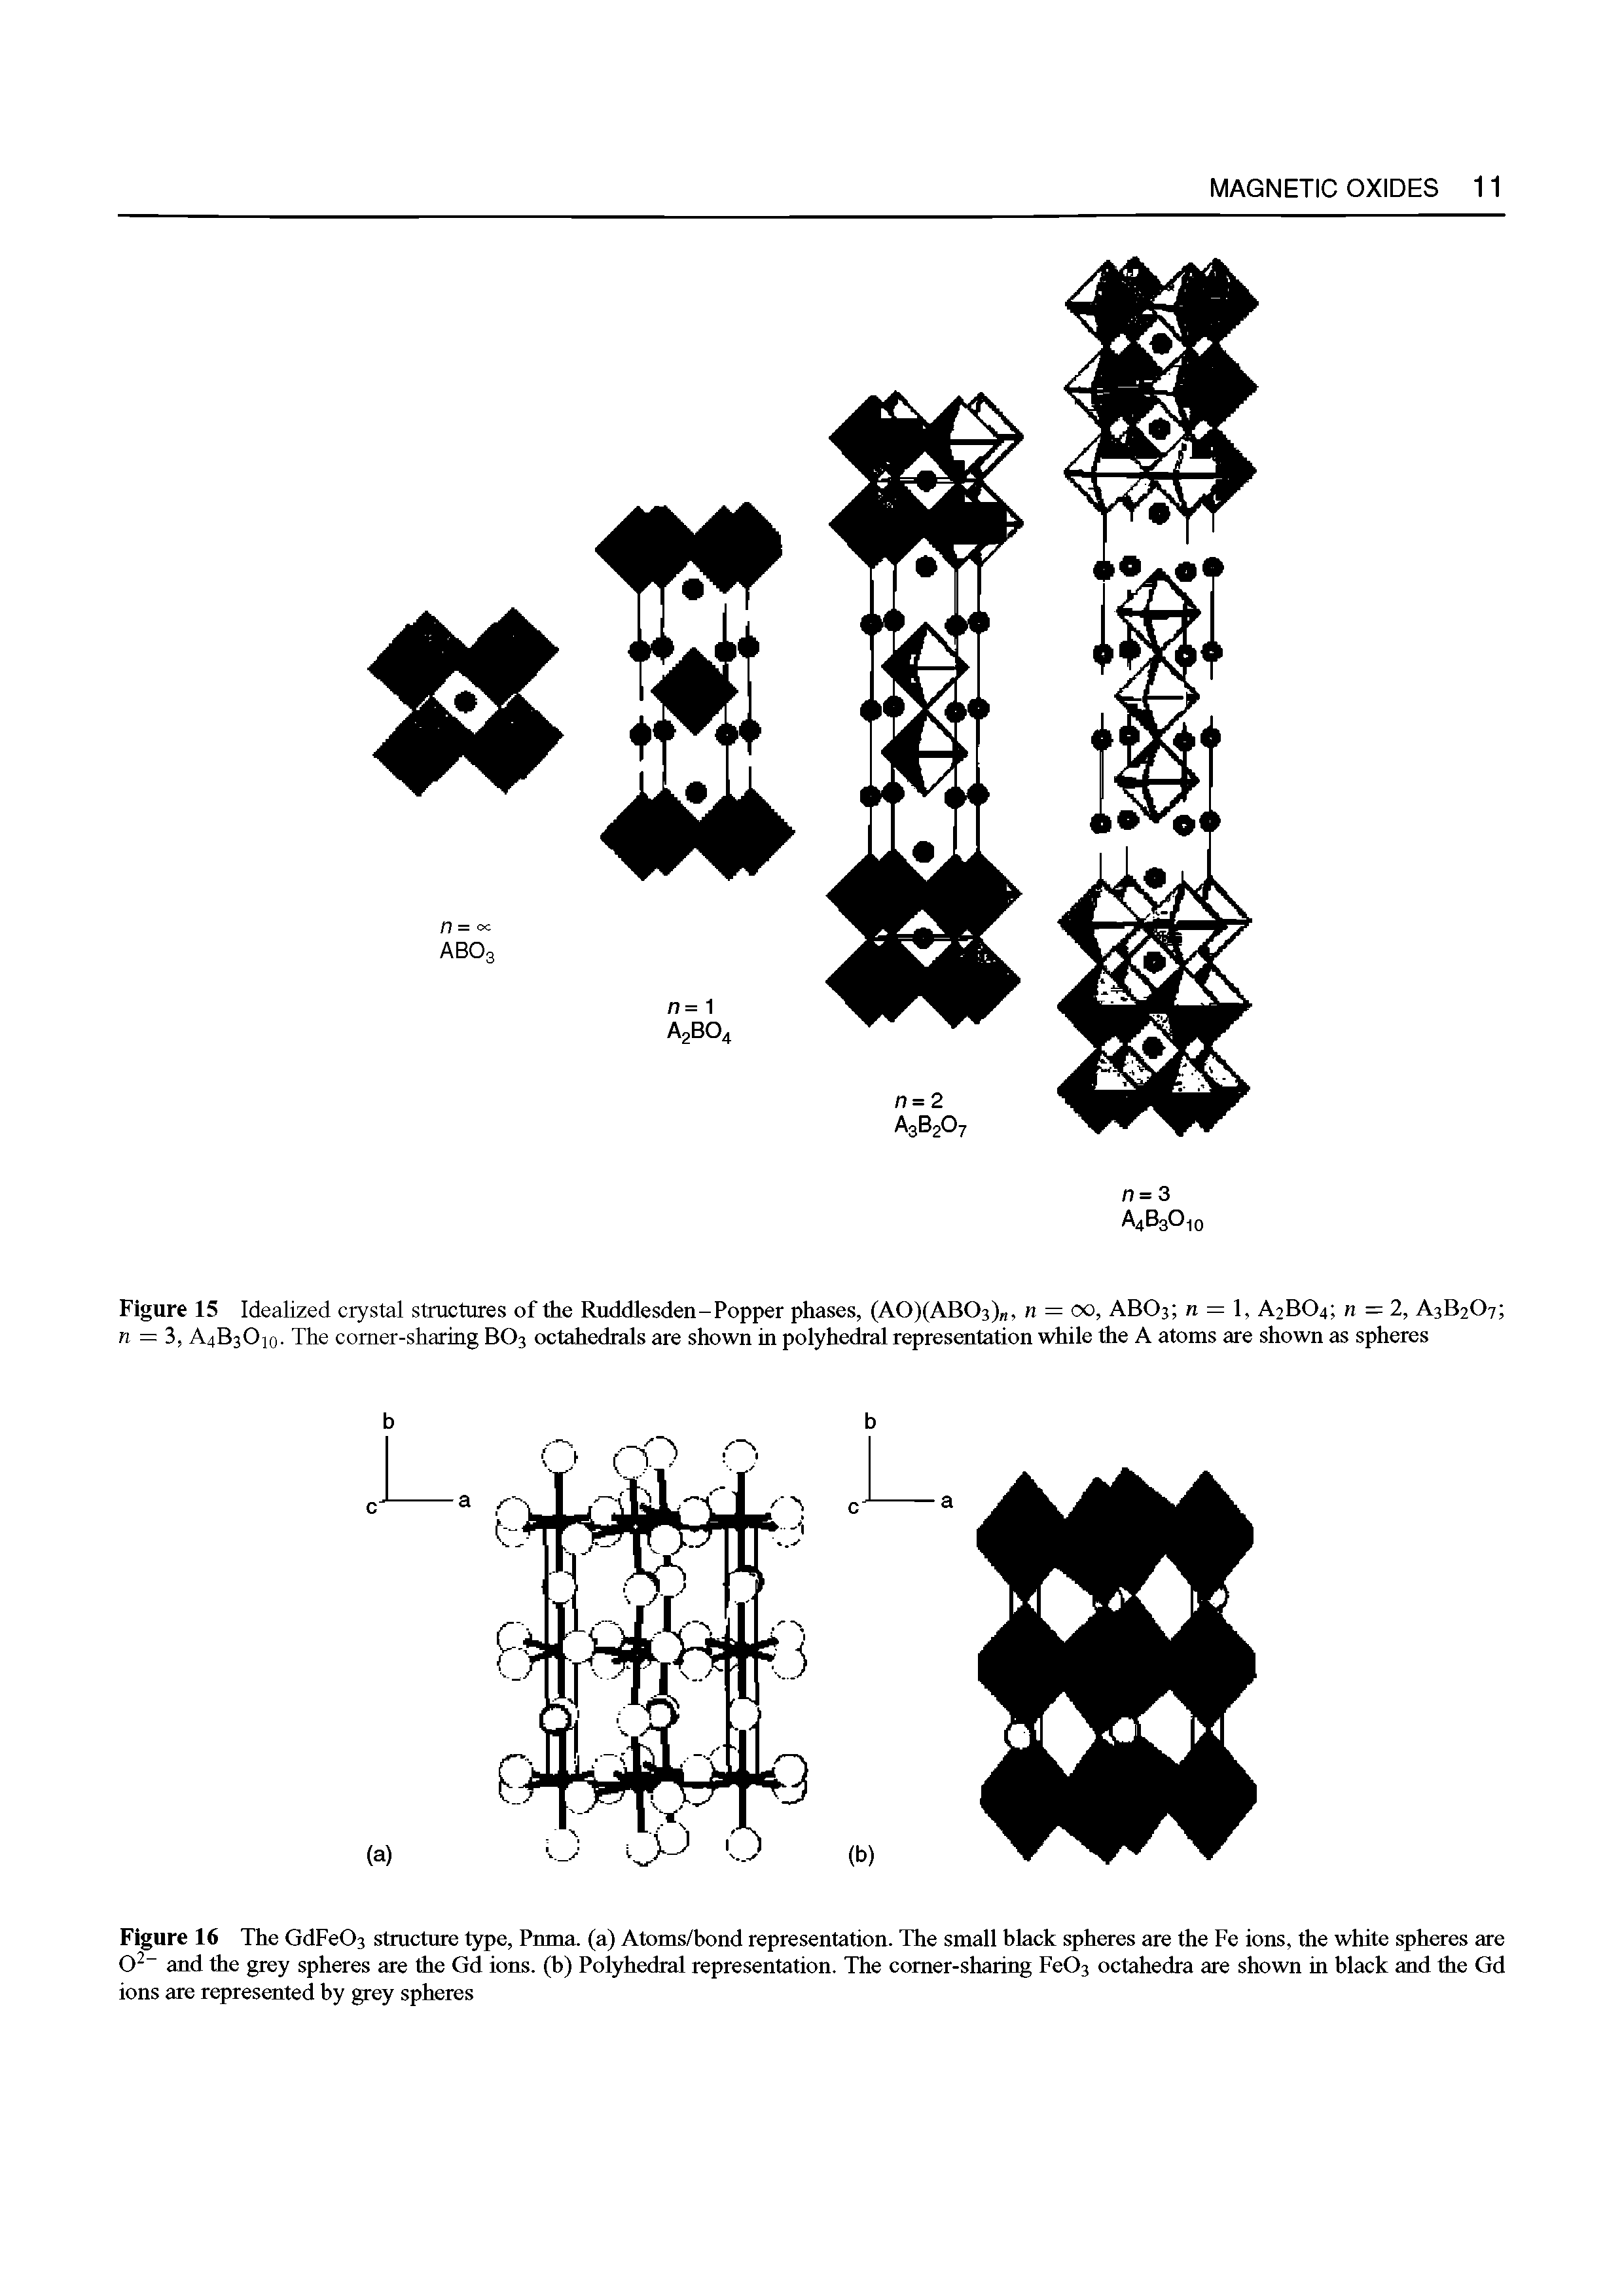 Figure 15 Idealized crystal structures of the Ruddlesden-Popper phases, (A0)(AB03) , n = 00, ABO3 n = 1, A2BO4 n = 2, A3B2O7 n = 3, A4B3O10. The comer-sharing BO3 octahedrals are shown in polyhedral representation while the A atoms are shown as spheres...